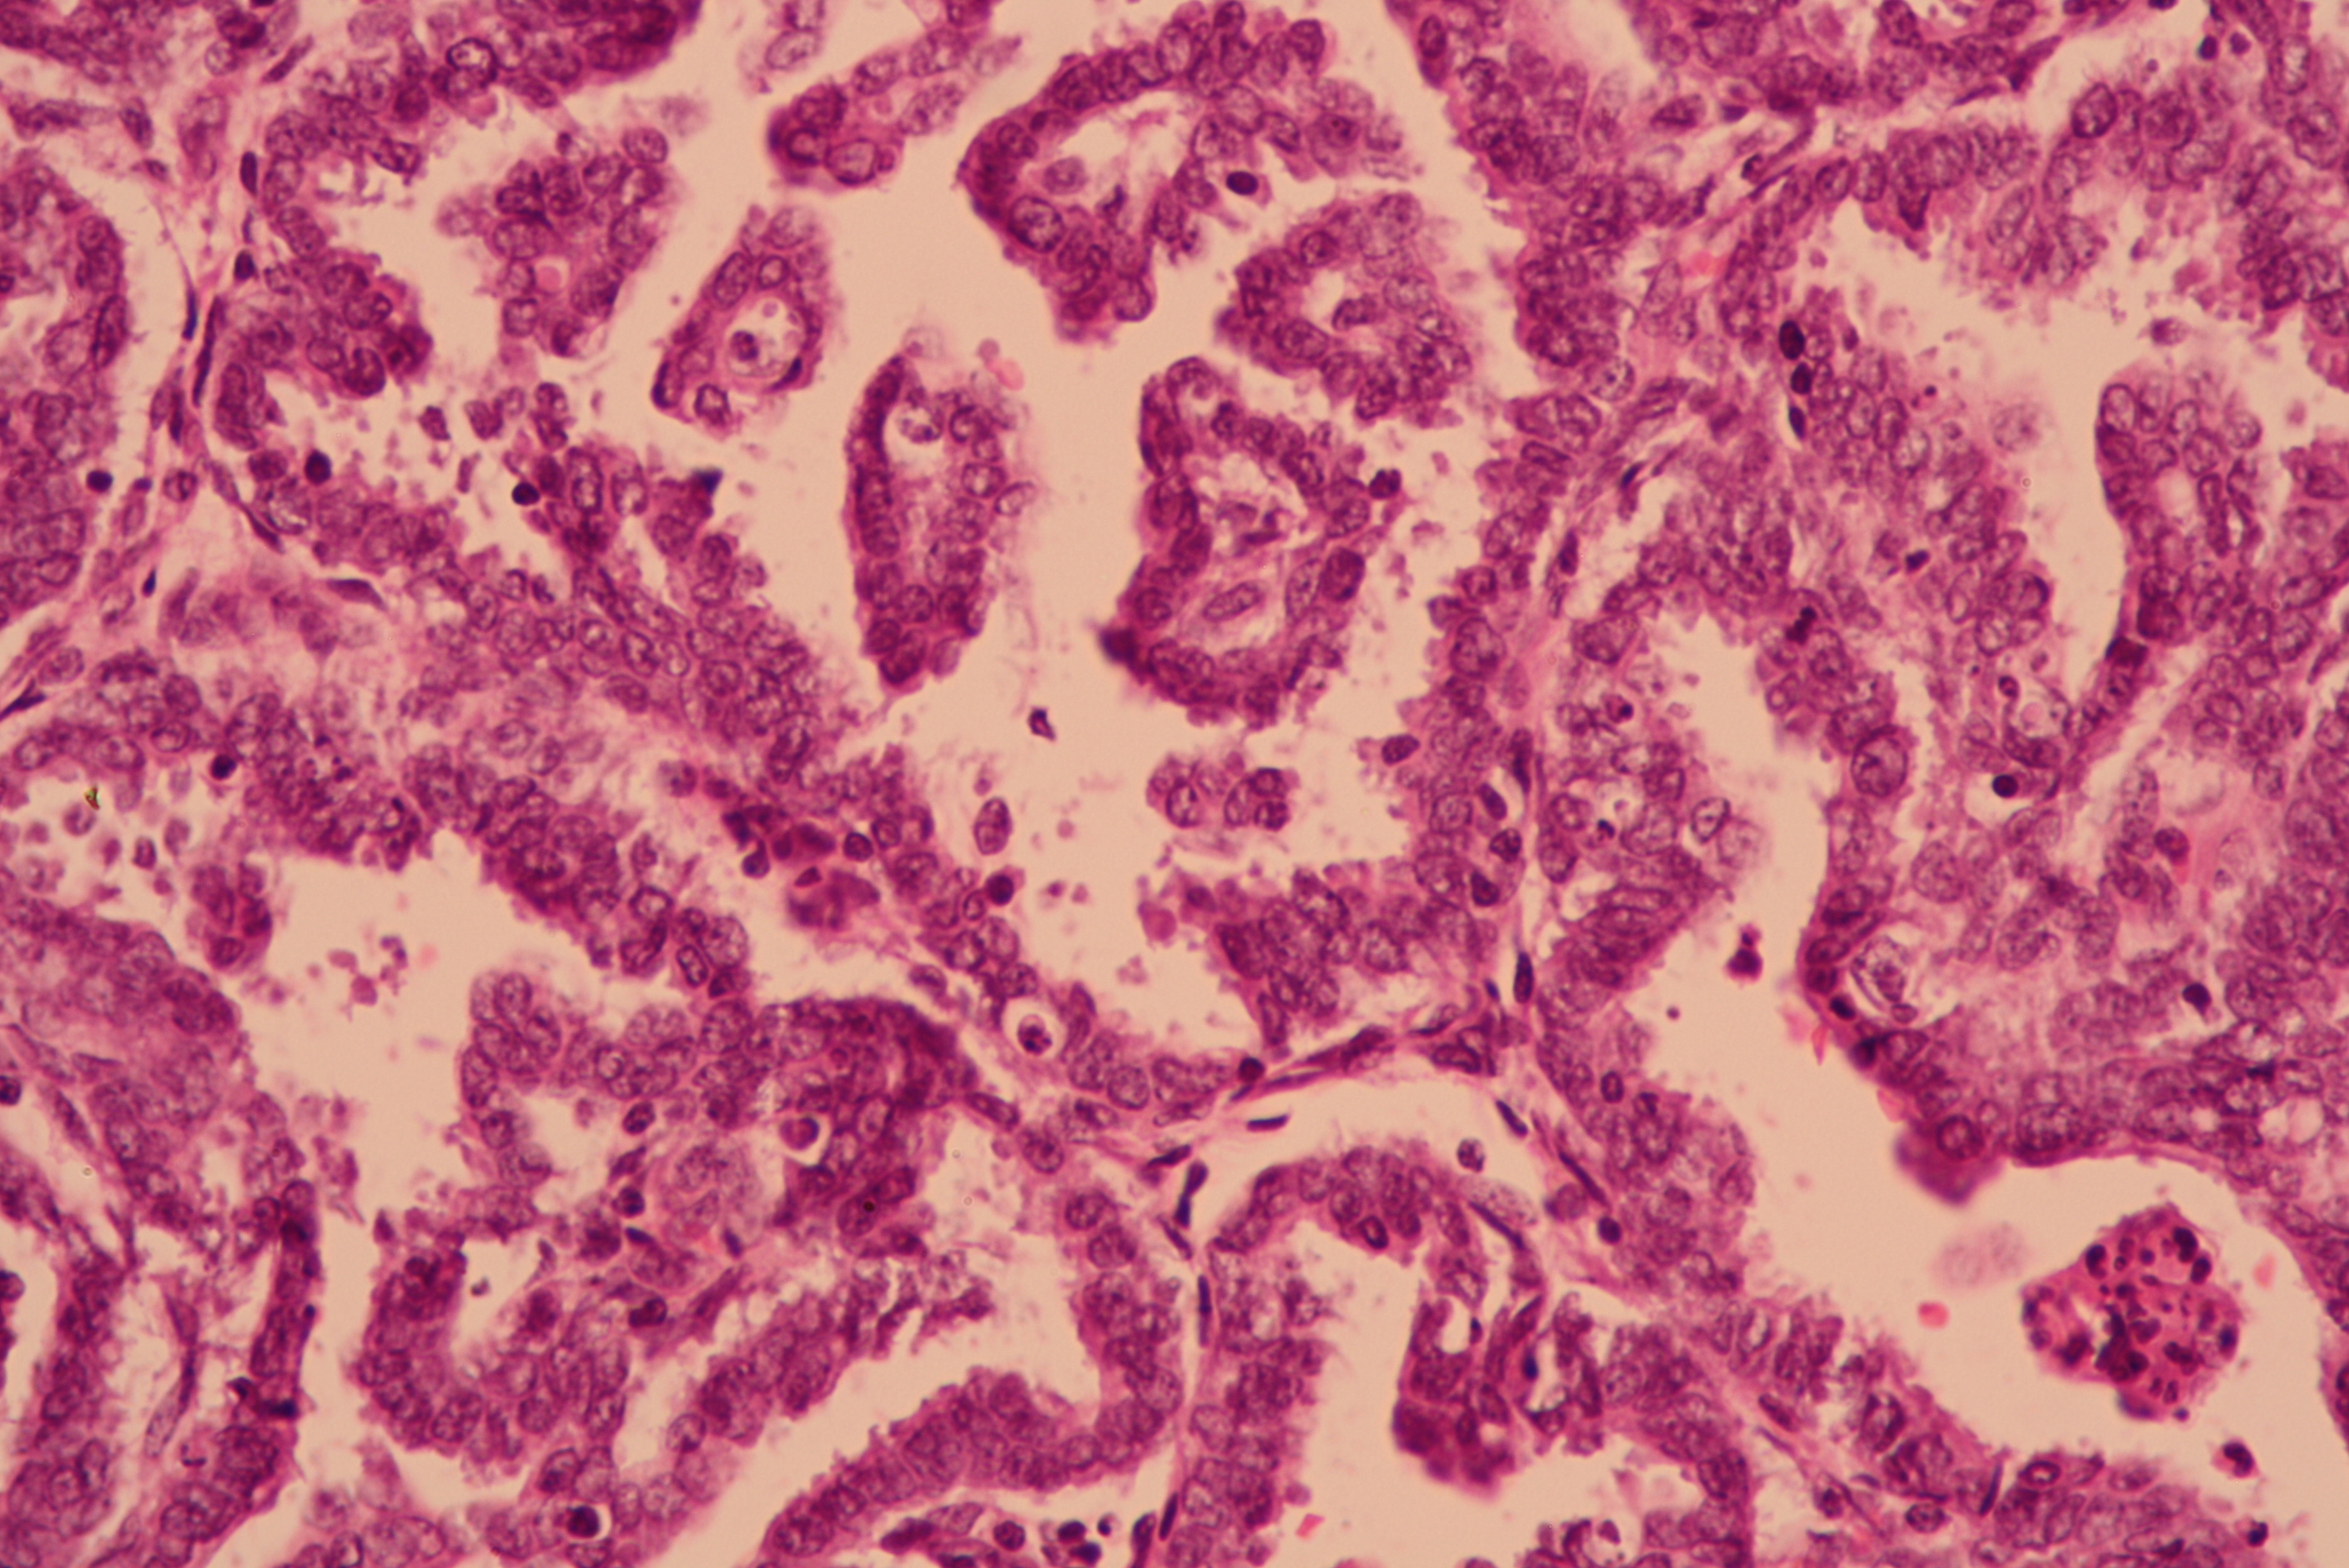 Pathology Outlines Case Of The Week 422